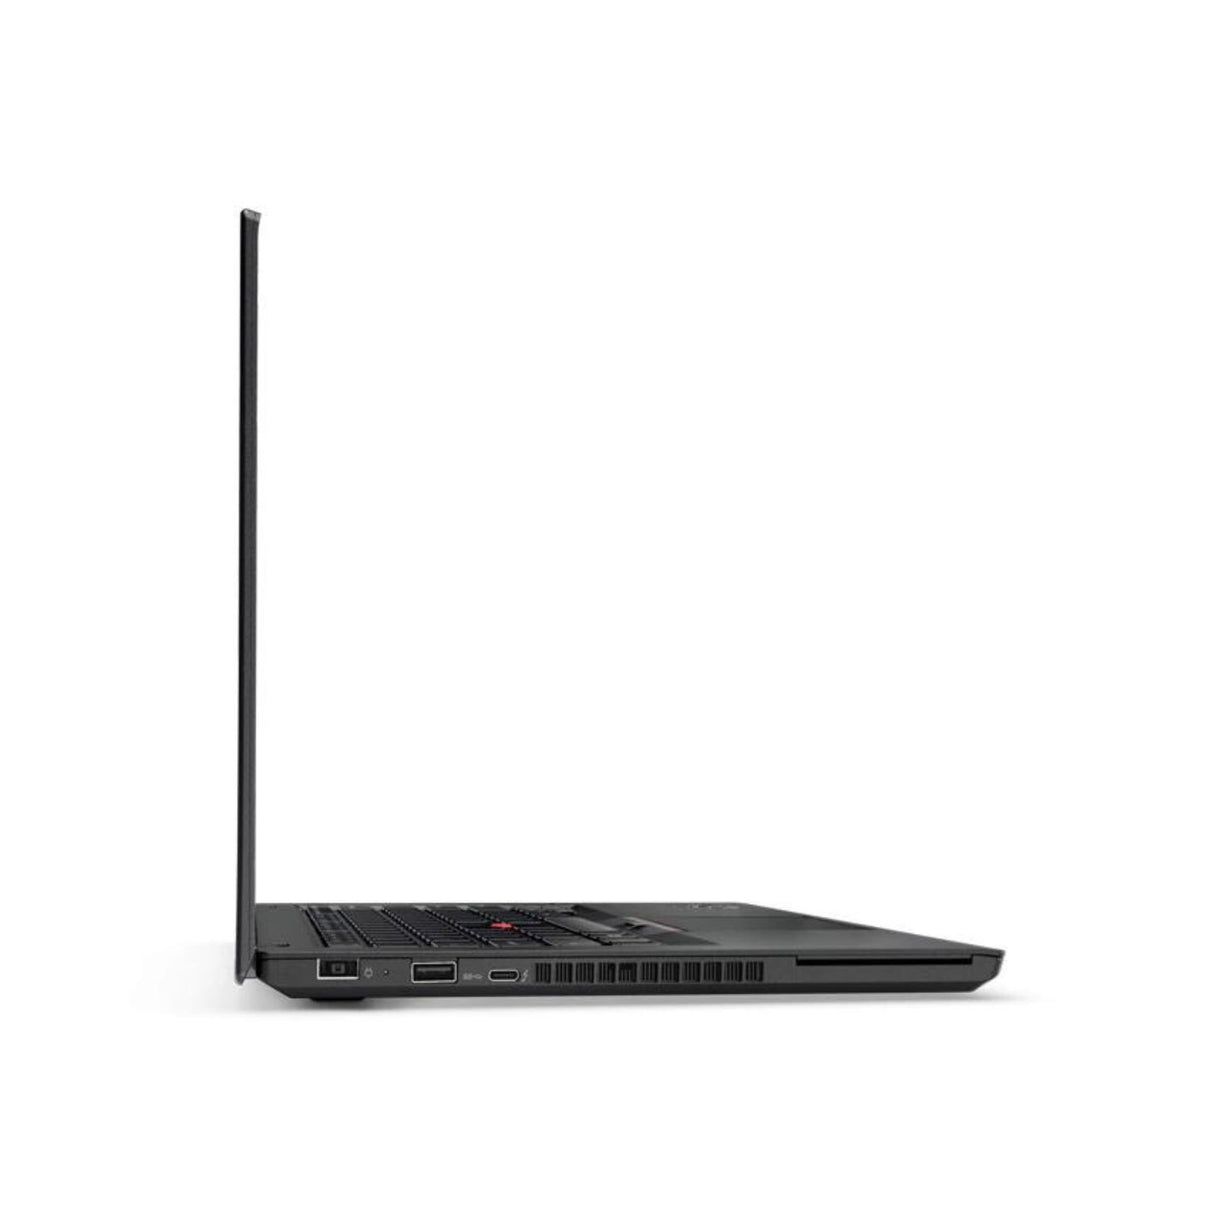 Lenovo ThinkPad T470 i5 6th gen 14 inches FHD Display laptop Windows 10 With Ms Office 2016(Renewed)